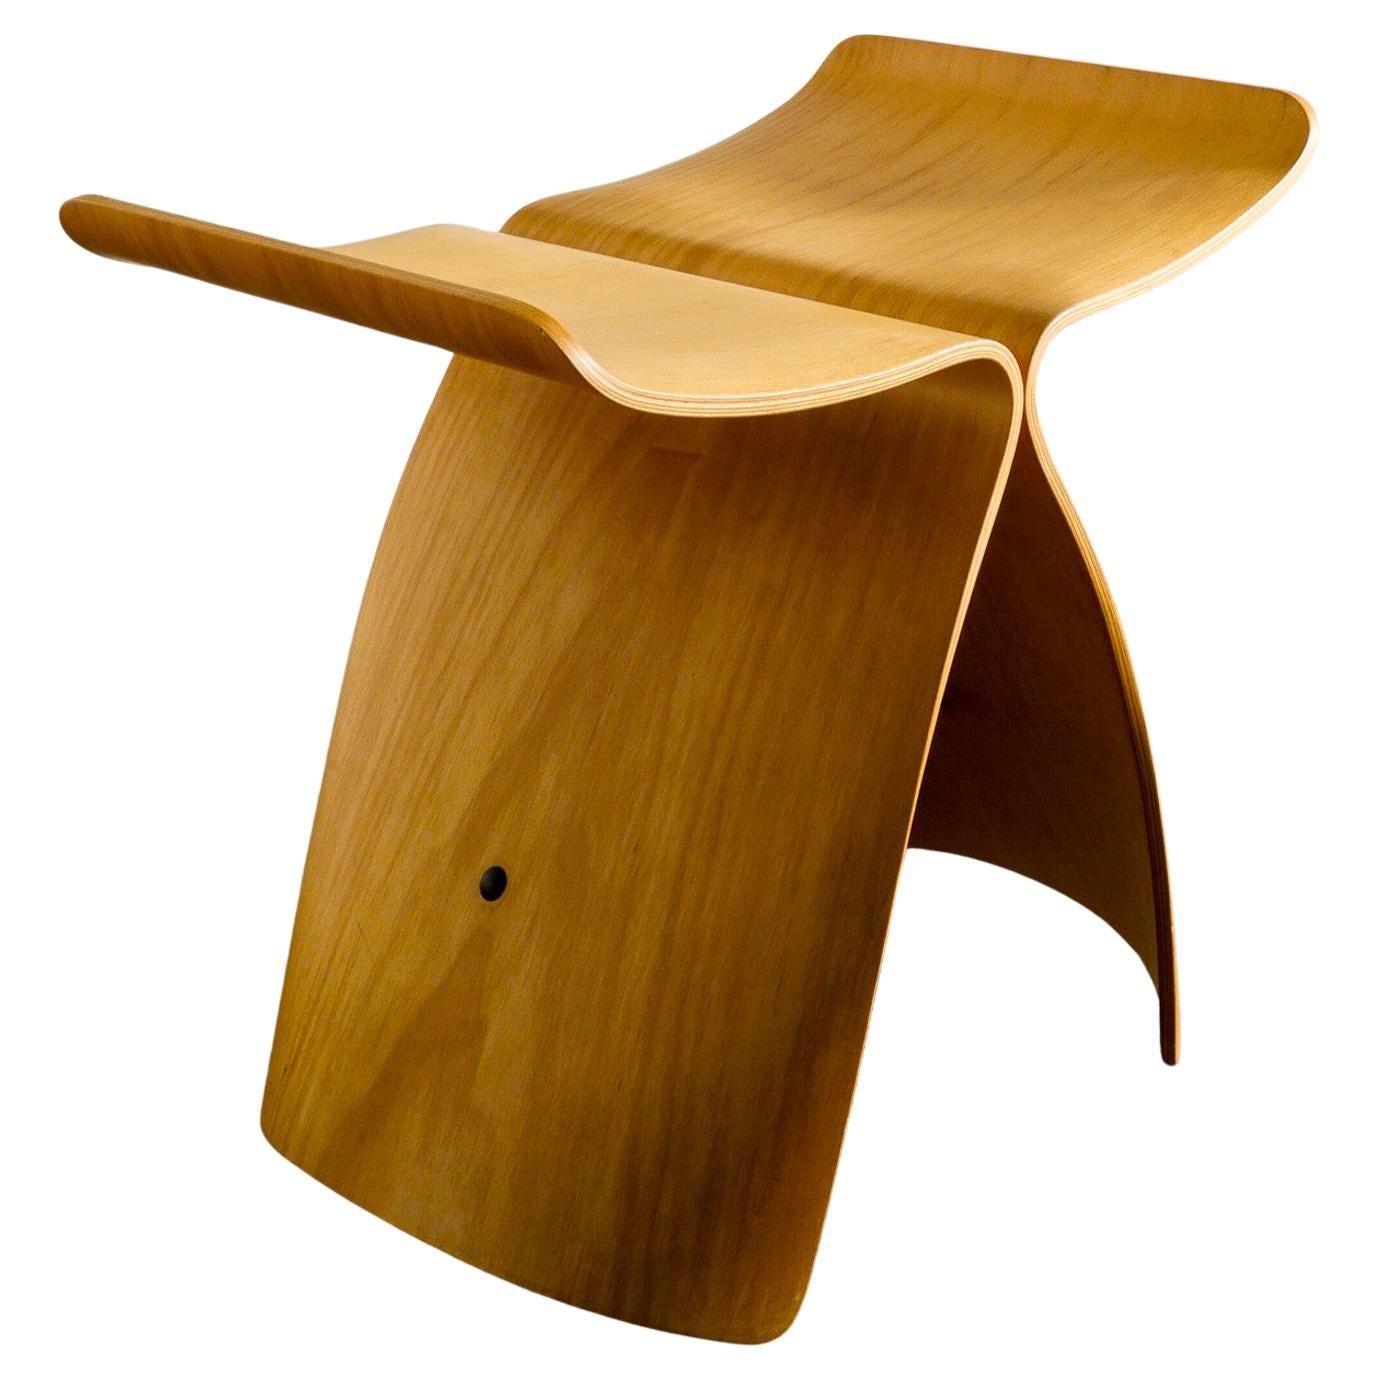 Sori Yanagi "Butterfly" Mid Century Stool in Plywood Produced by Tendo, 1980s For Sale